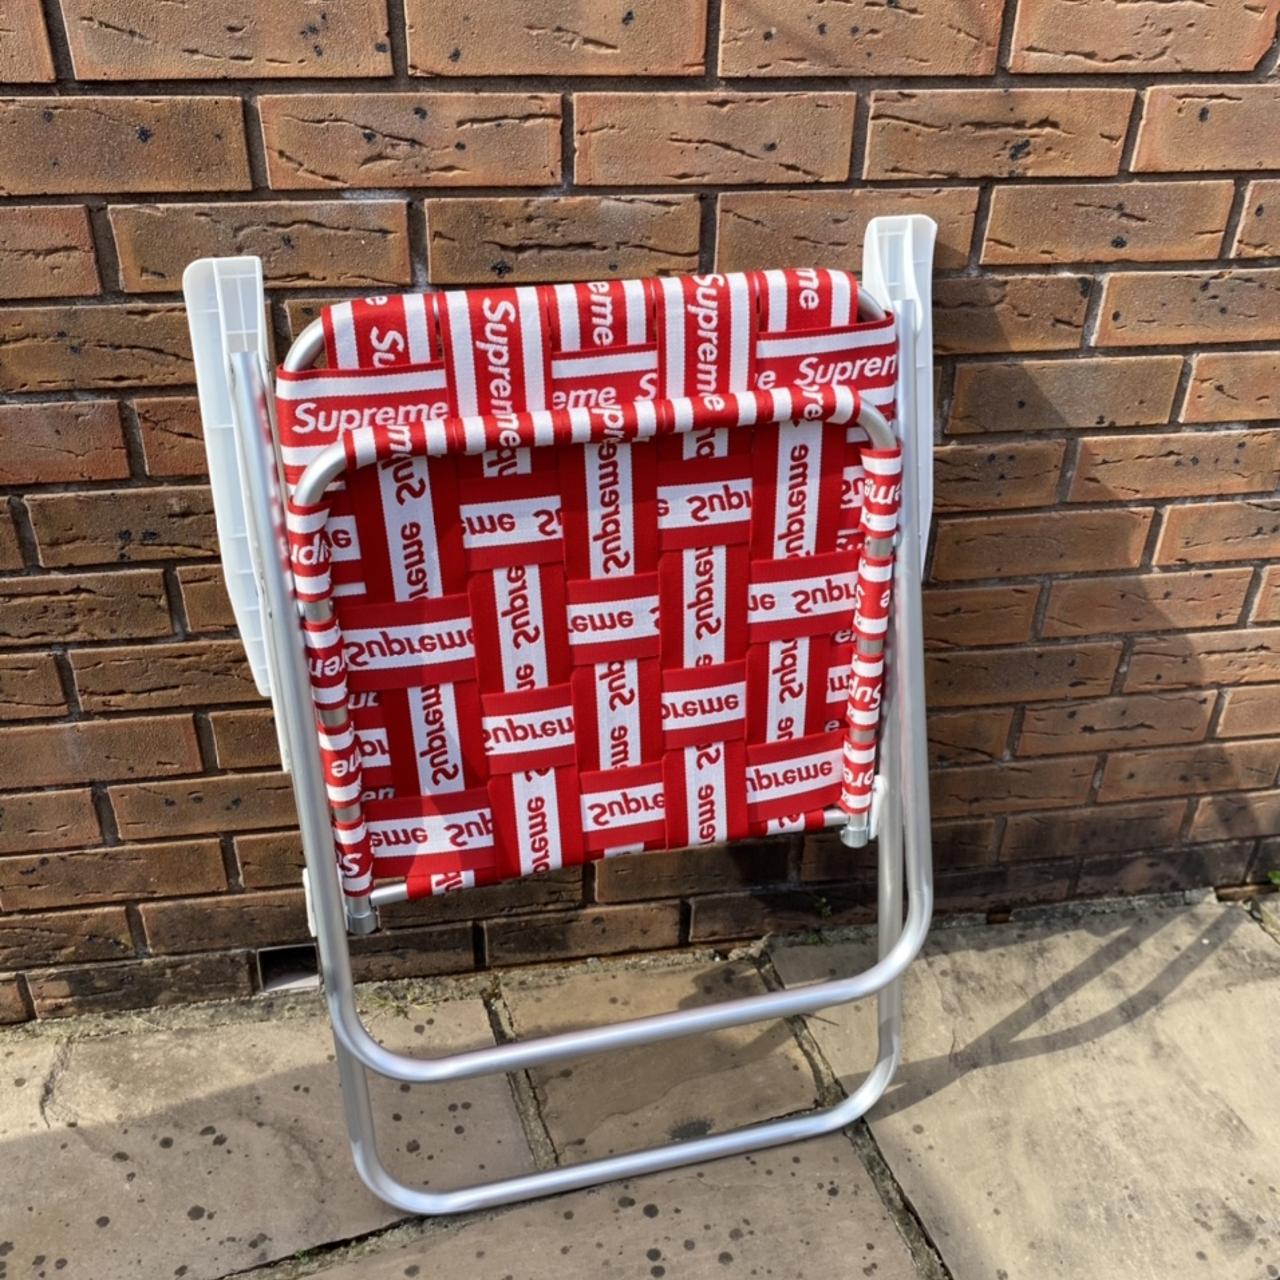 Supreme Lawn Chair, Brand New✅, £110💰, Open To...